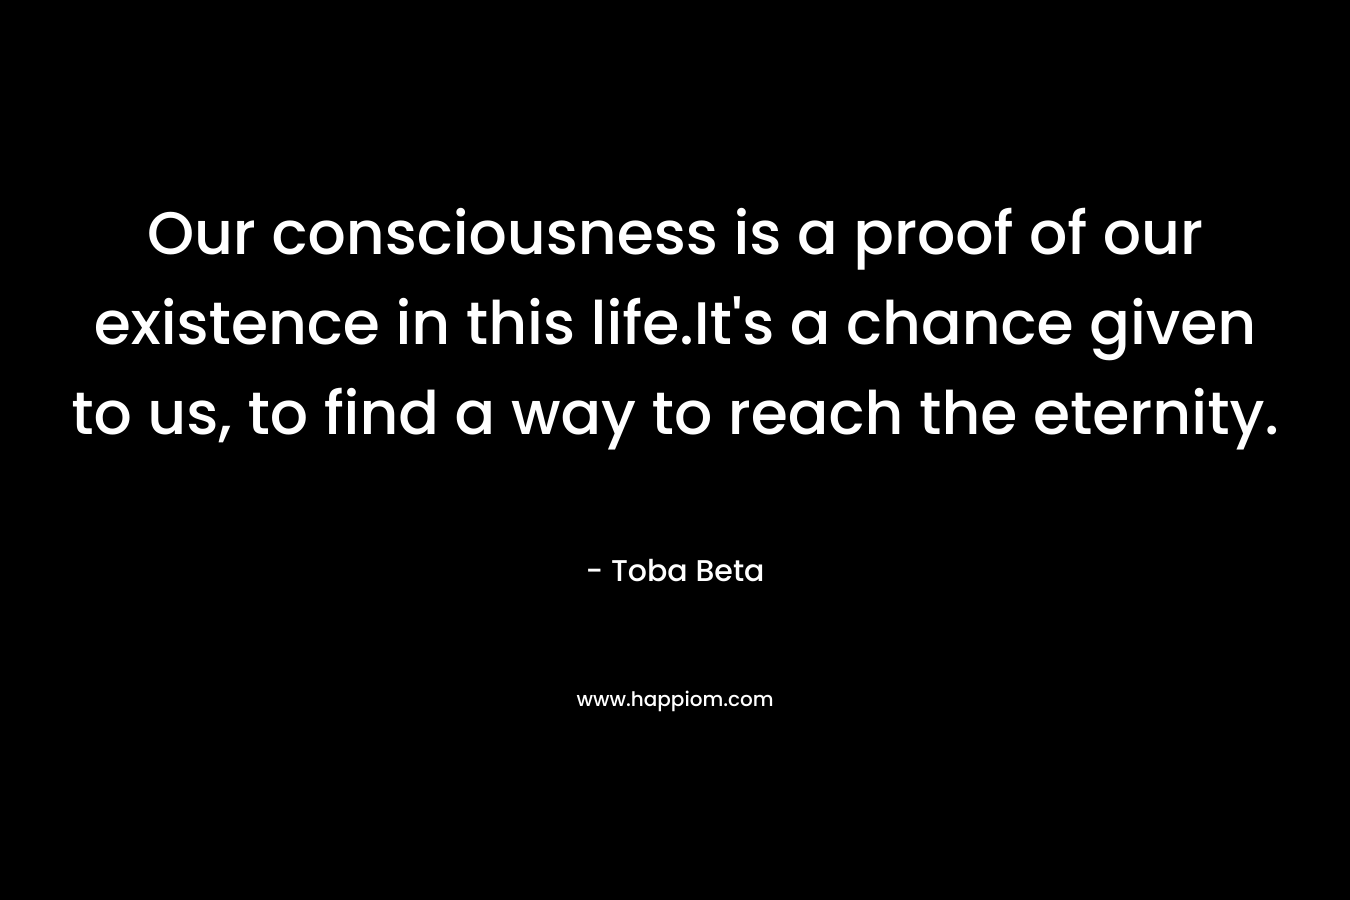 Our consciousness is a proof of our existence in this life.It's a chance given to us, to find a way to reach the eternity.